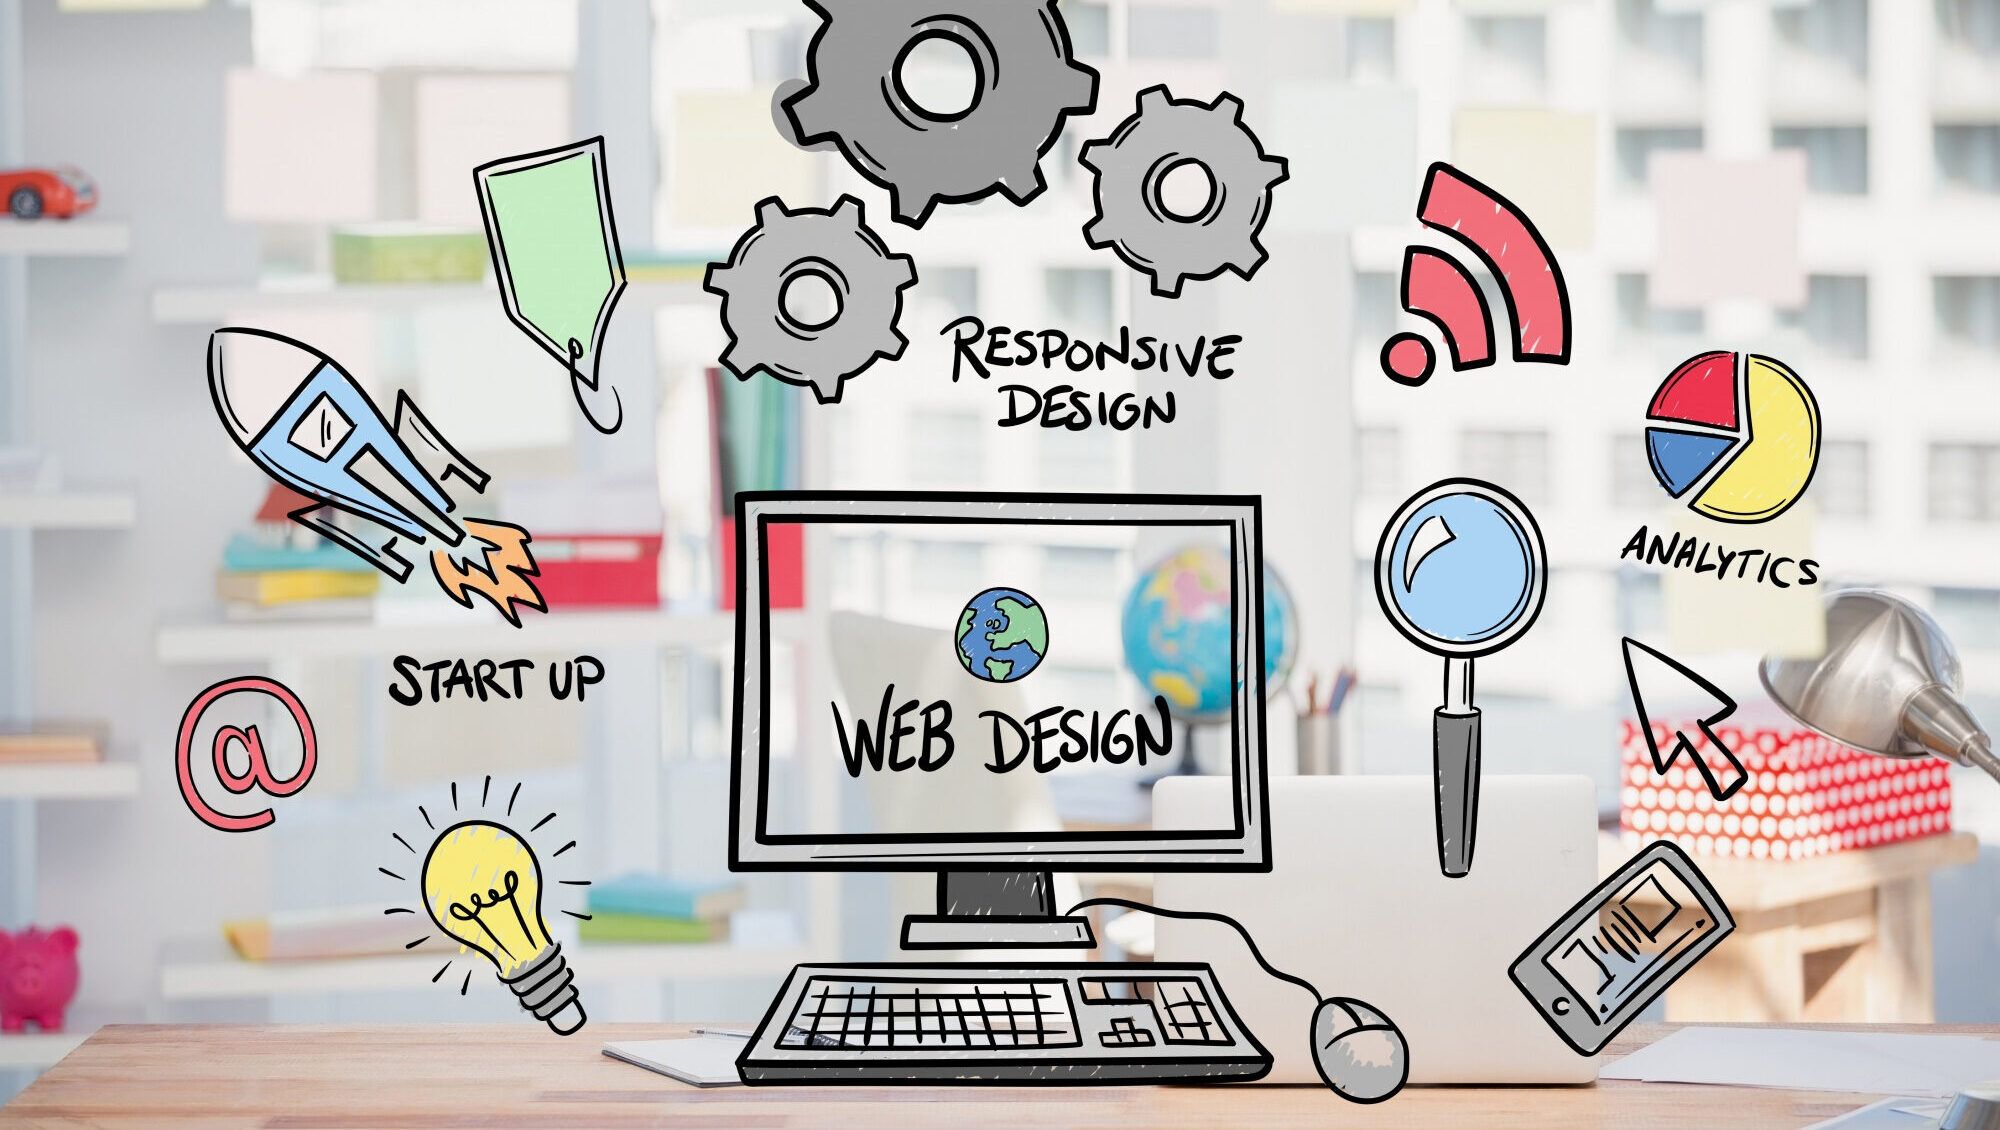 How to improve the conversion of visitors into customers through web design?